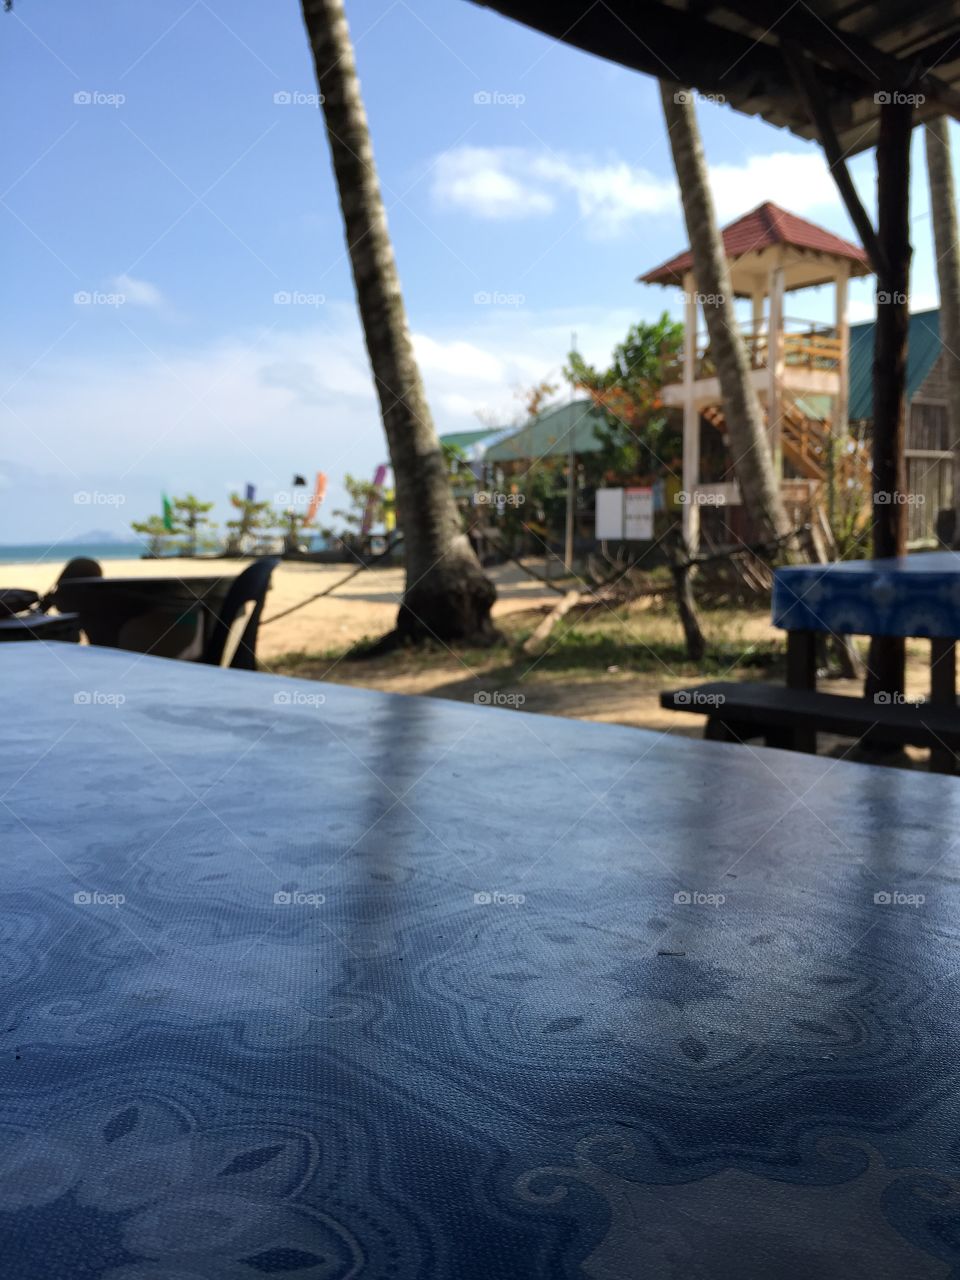 Coffee by the beach. Cherating, Malaysia